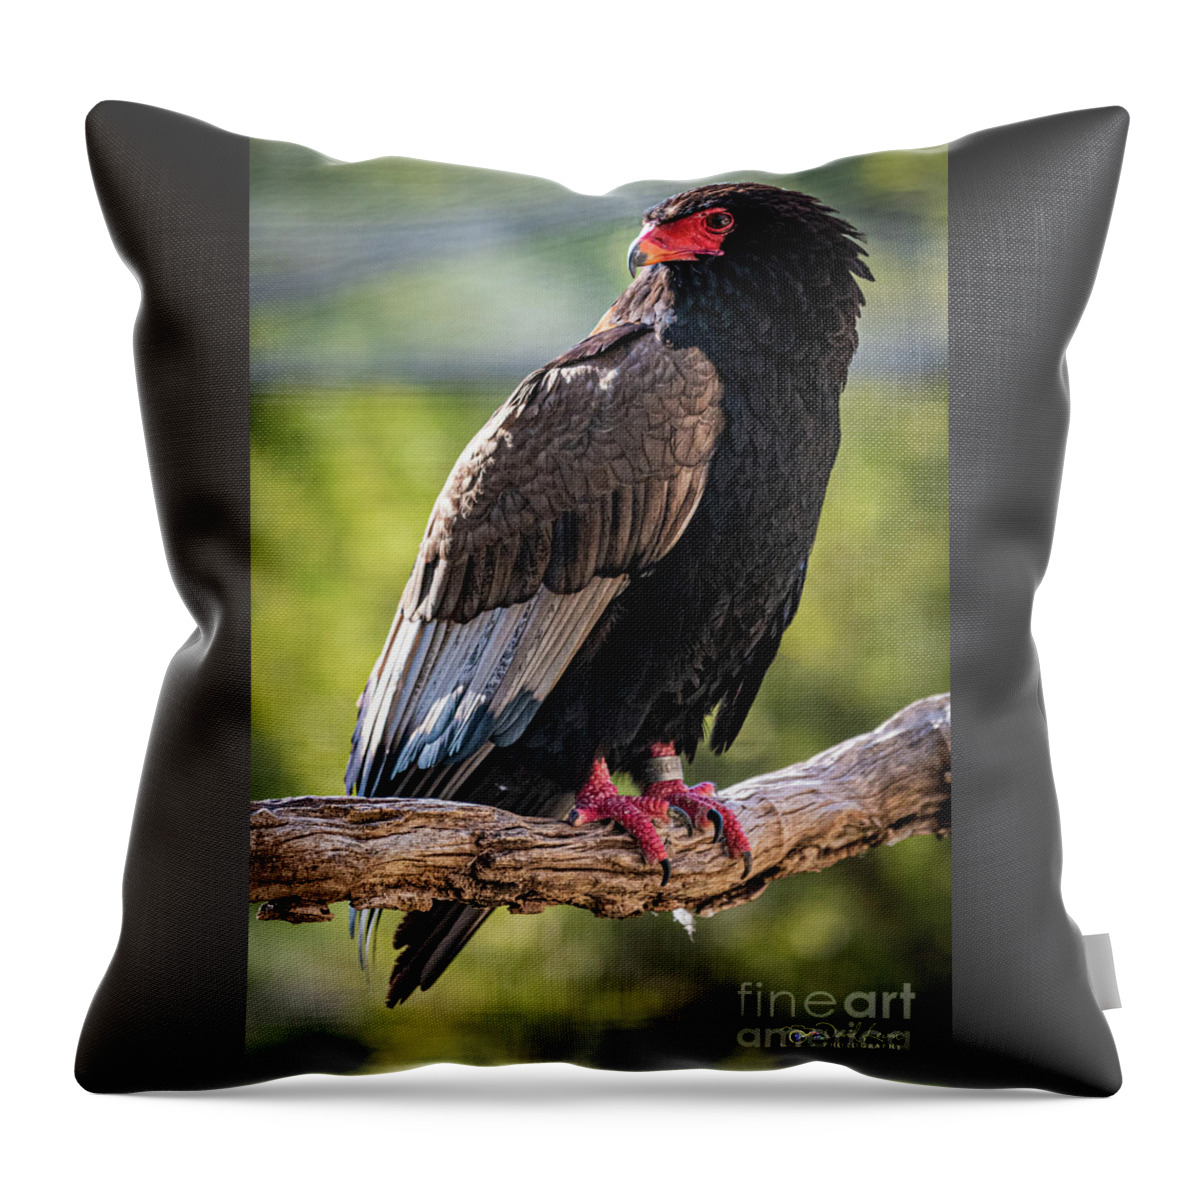 Bird Throw Pillow featuring the photograph Looking Over My Shoulder by David Levin